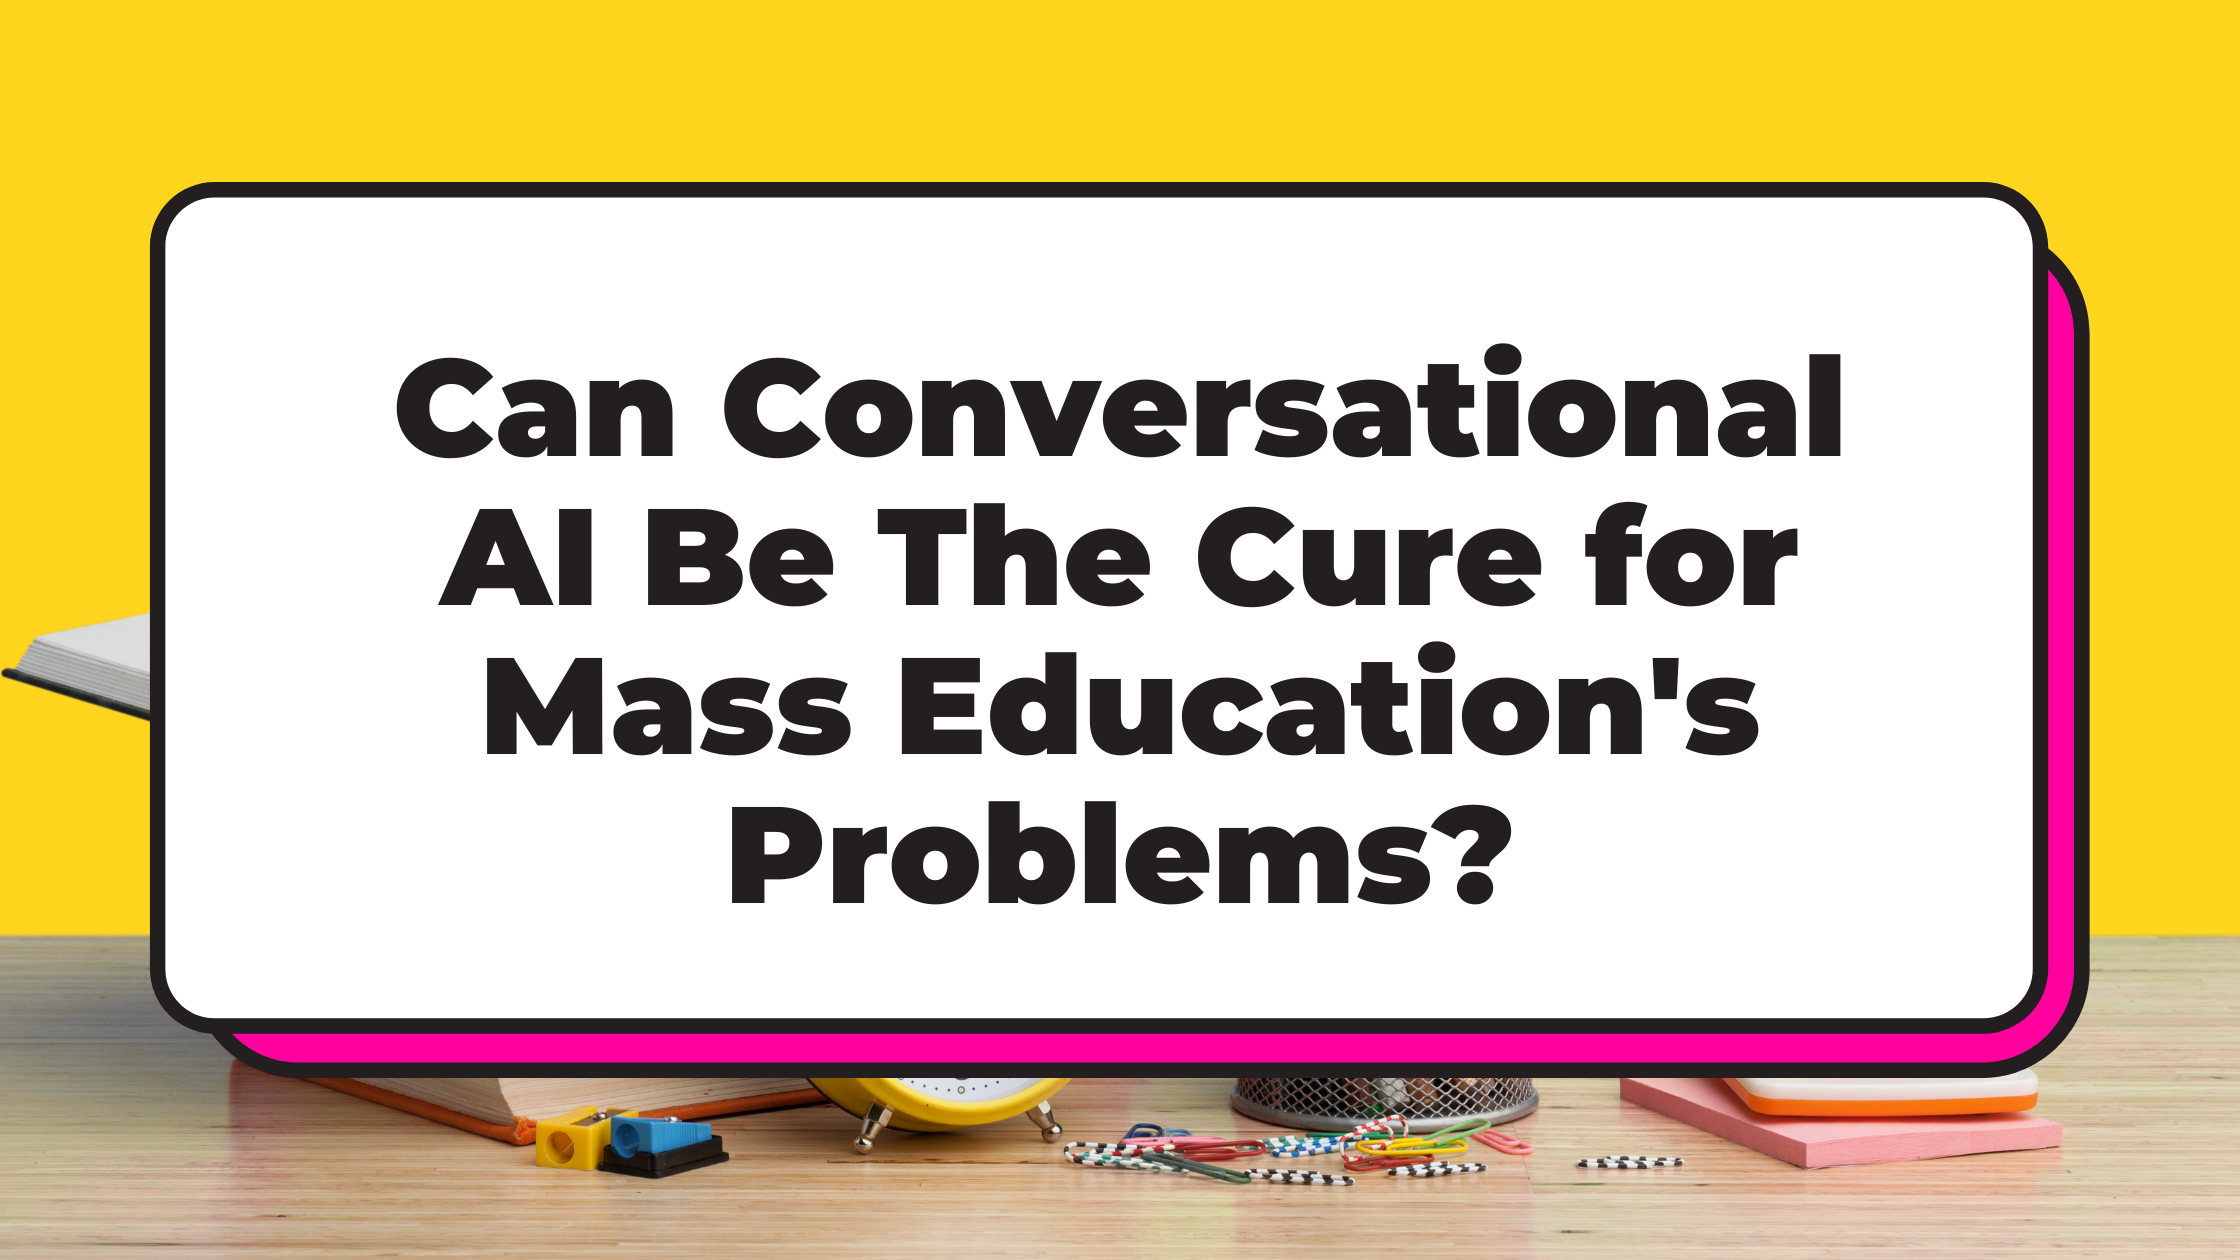 Can Conversational AI Be The Cure for Mass Education's Problems?